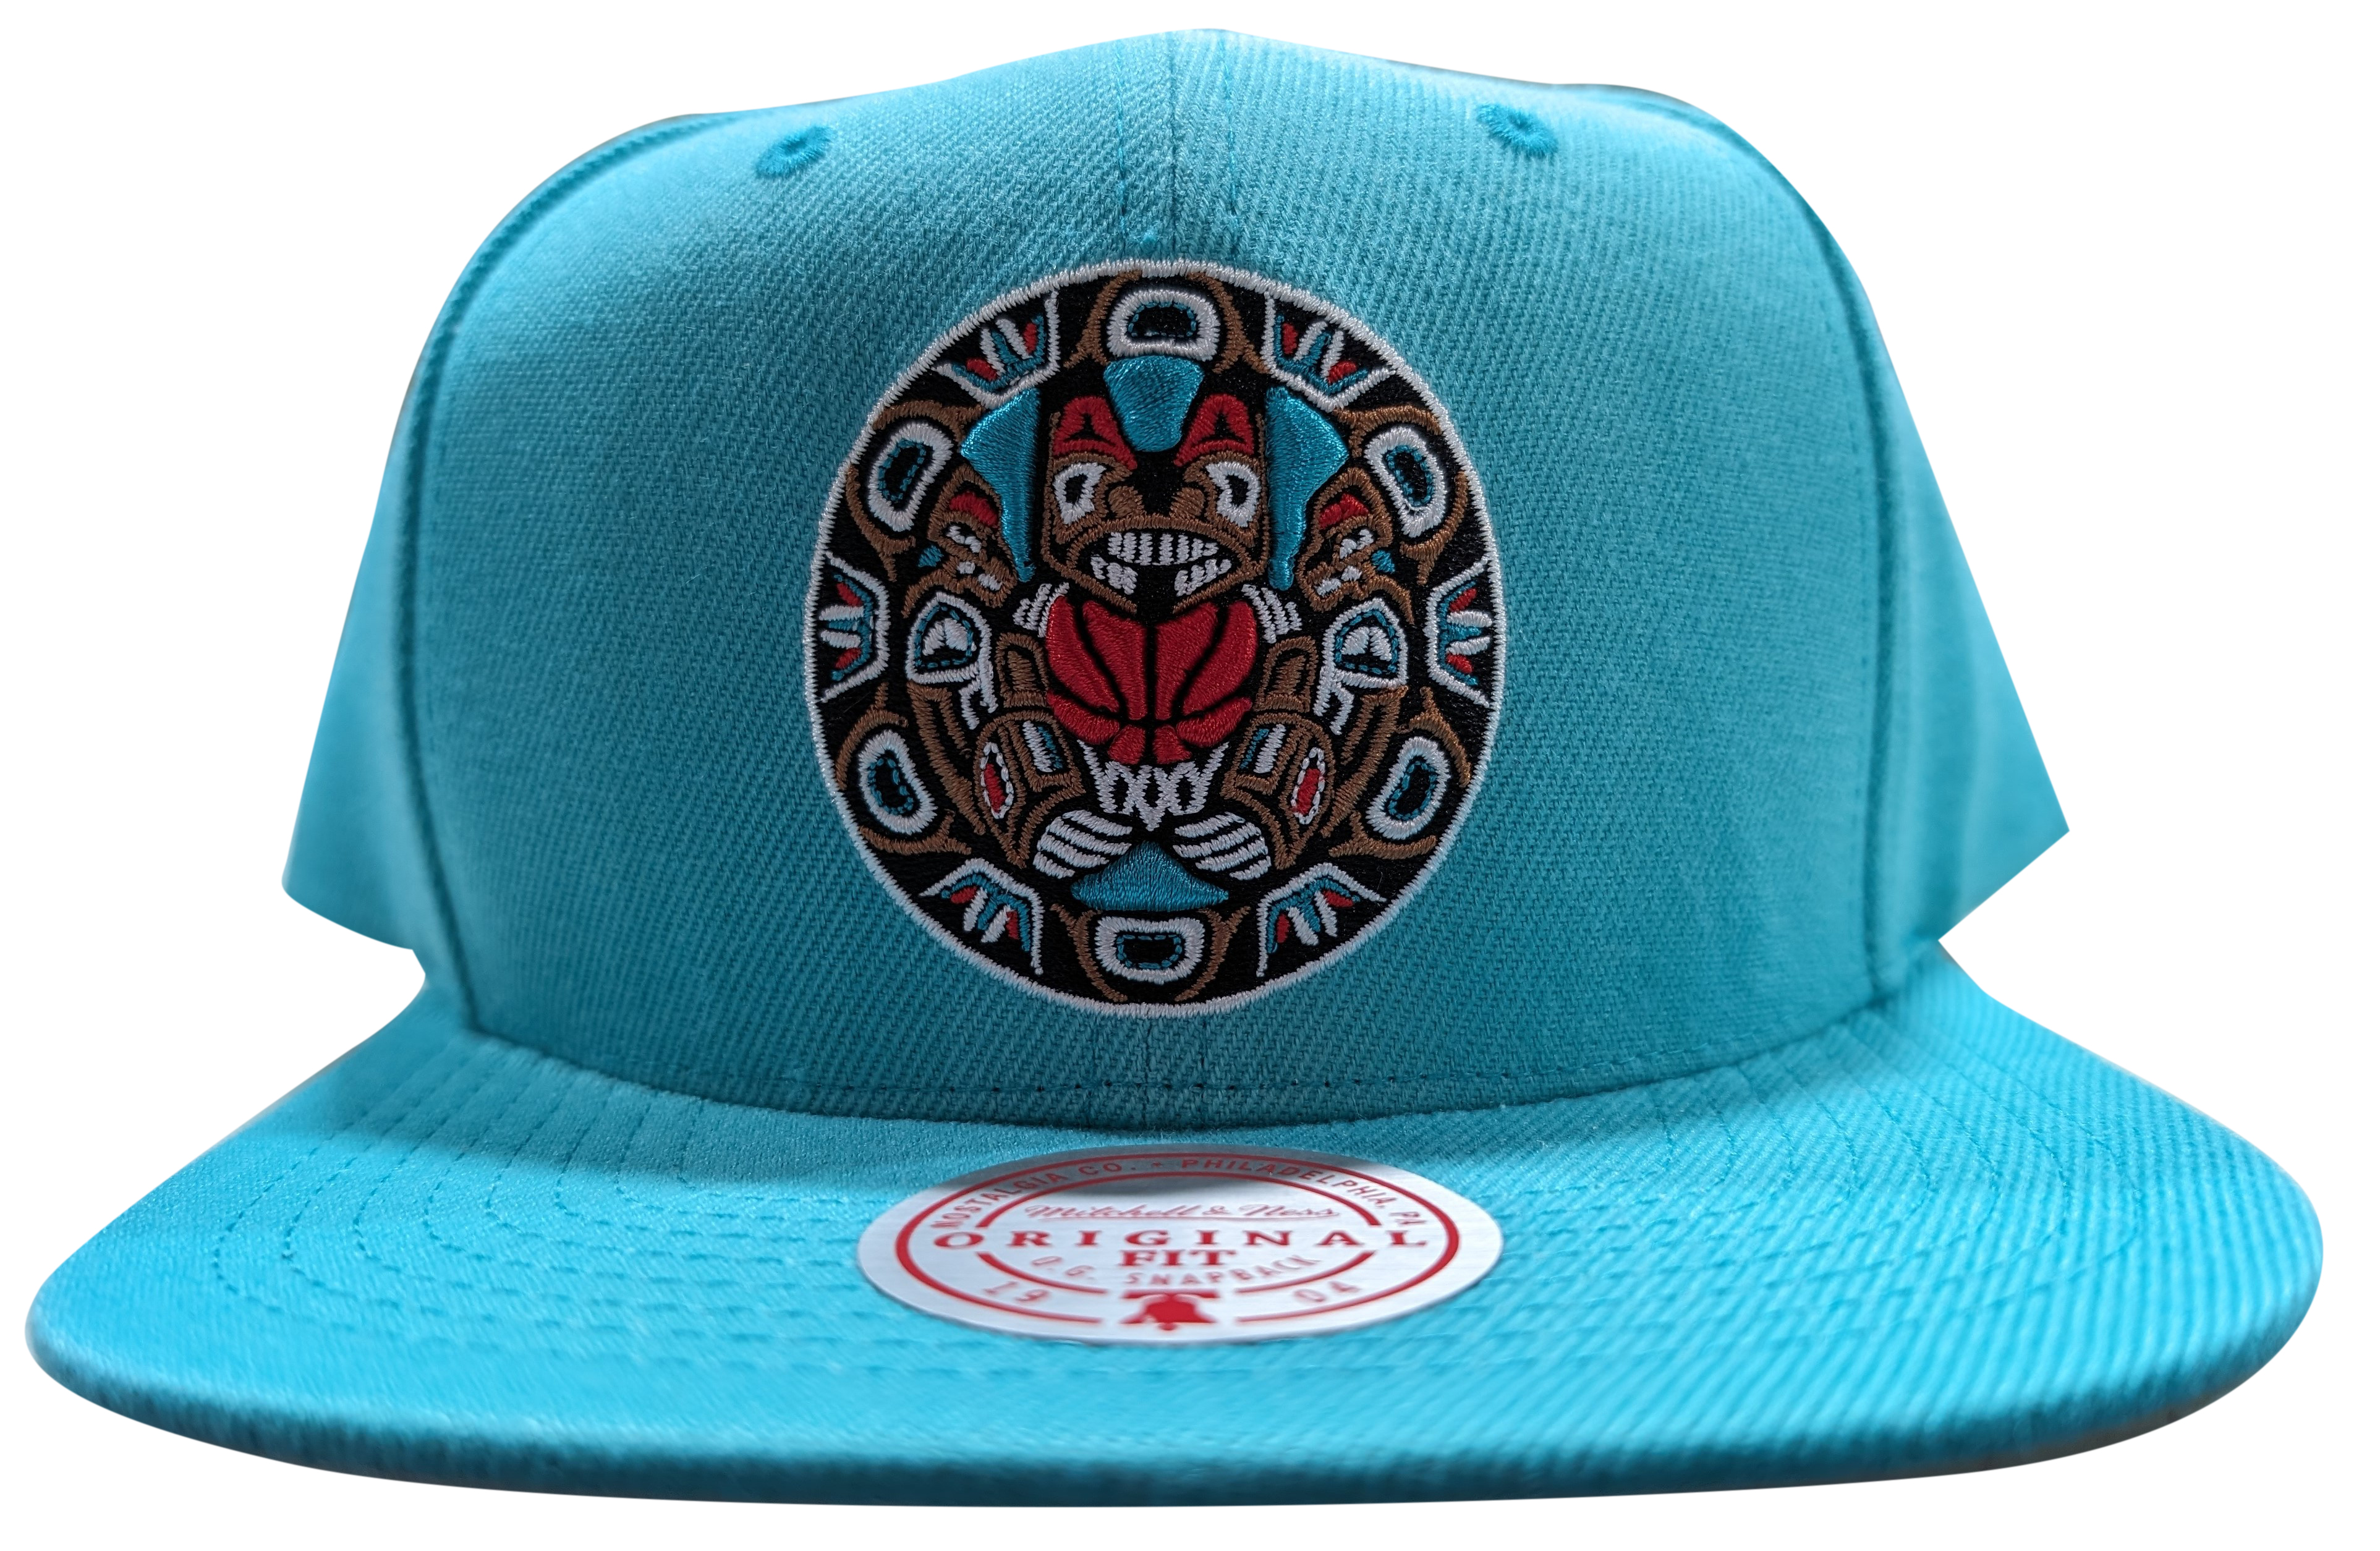 Mitchell & Ness Teal NBA Vancouver Grizzlies HWC Core Basic Snapback